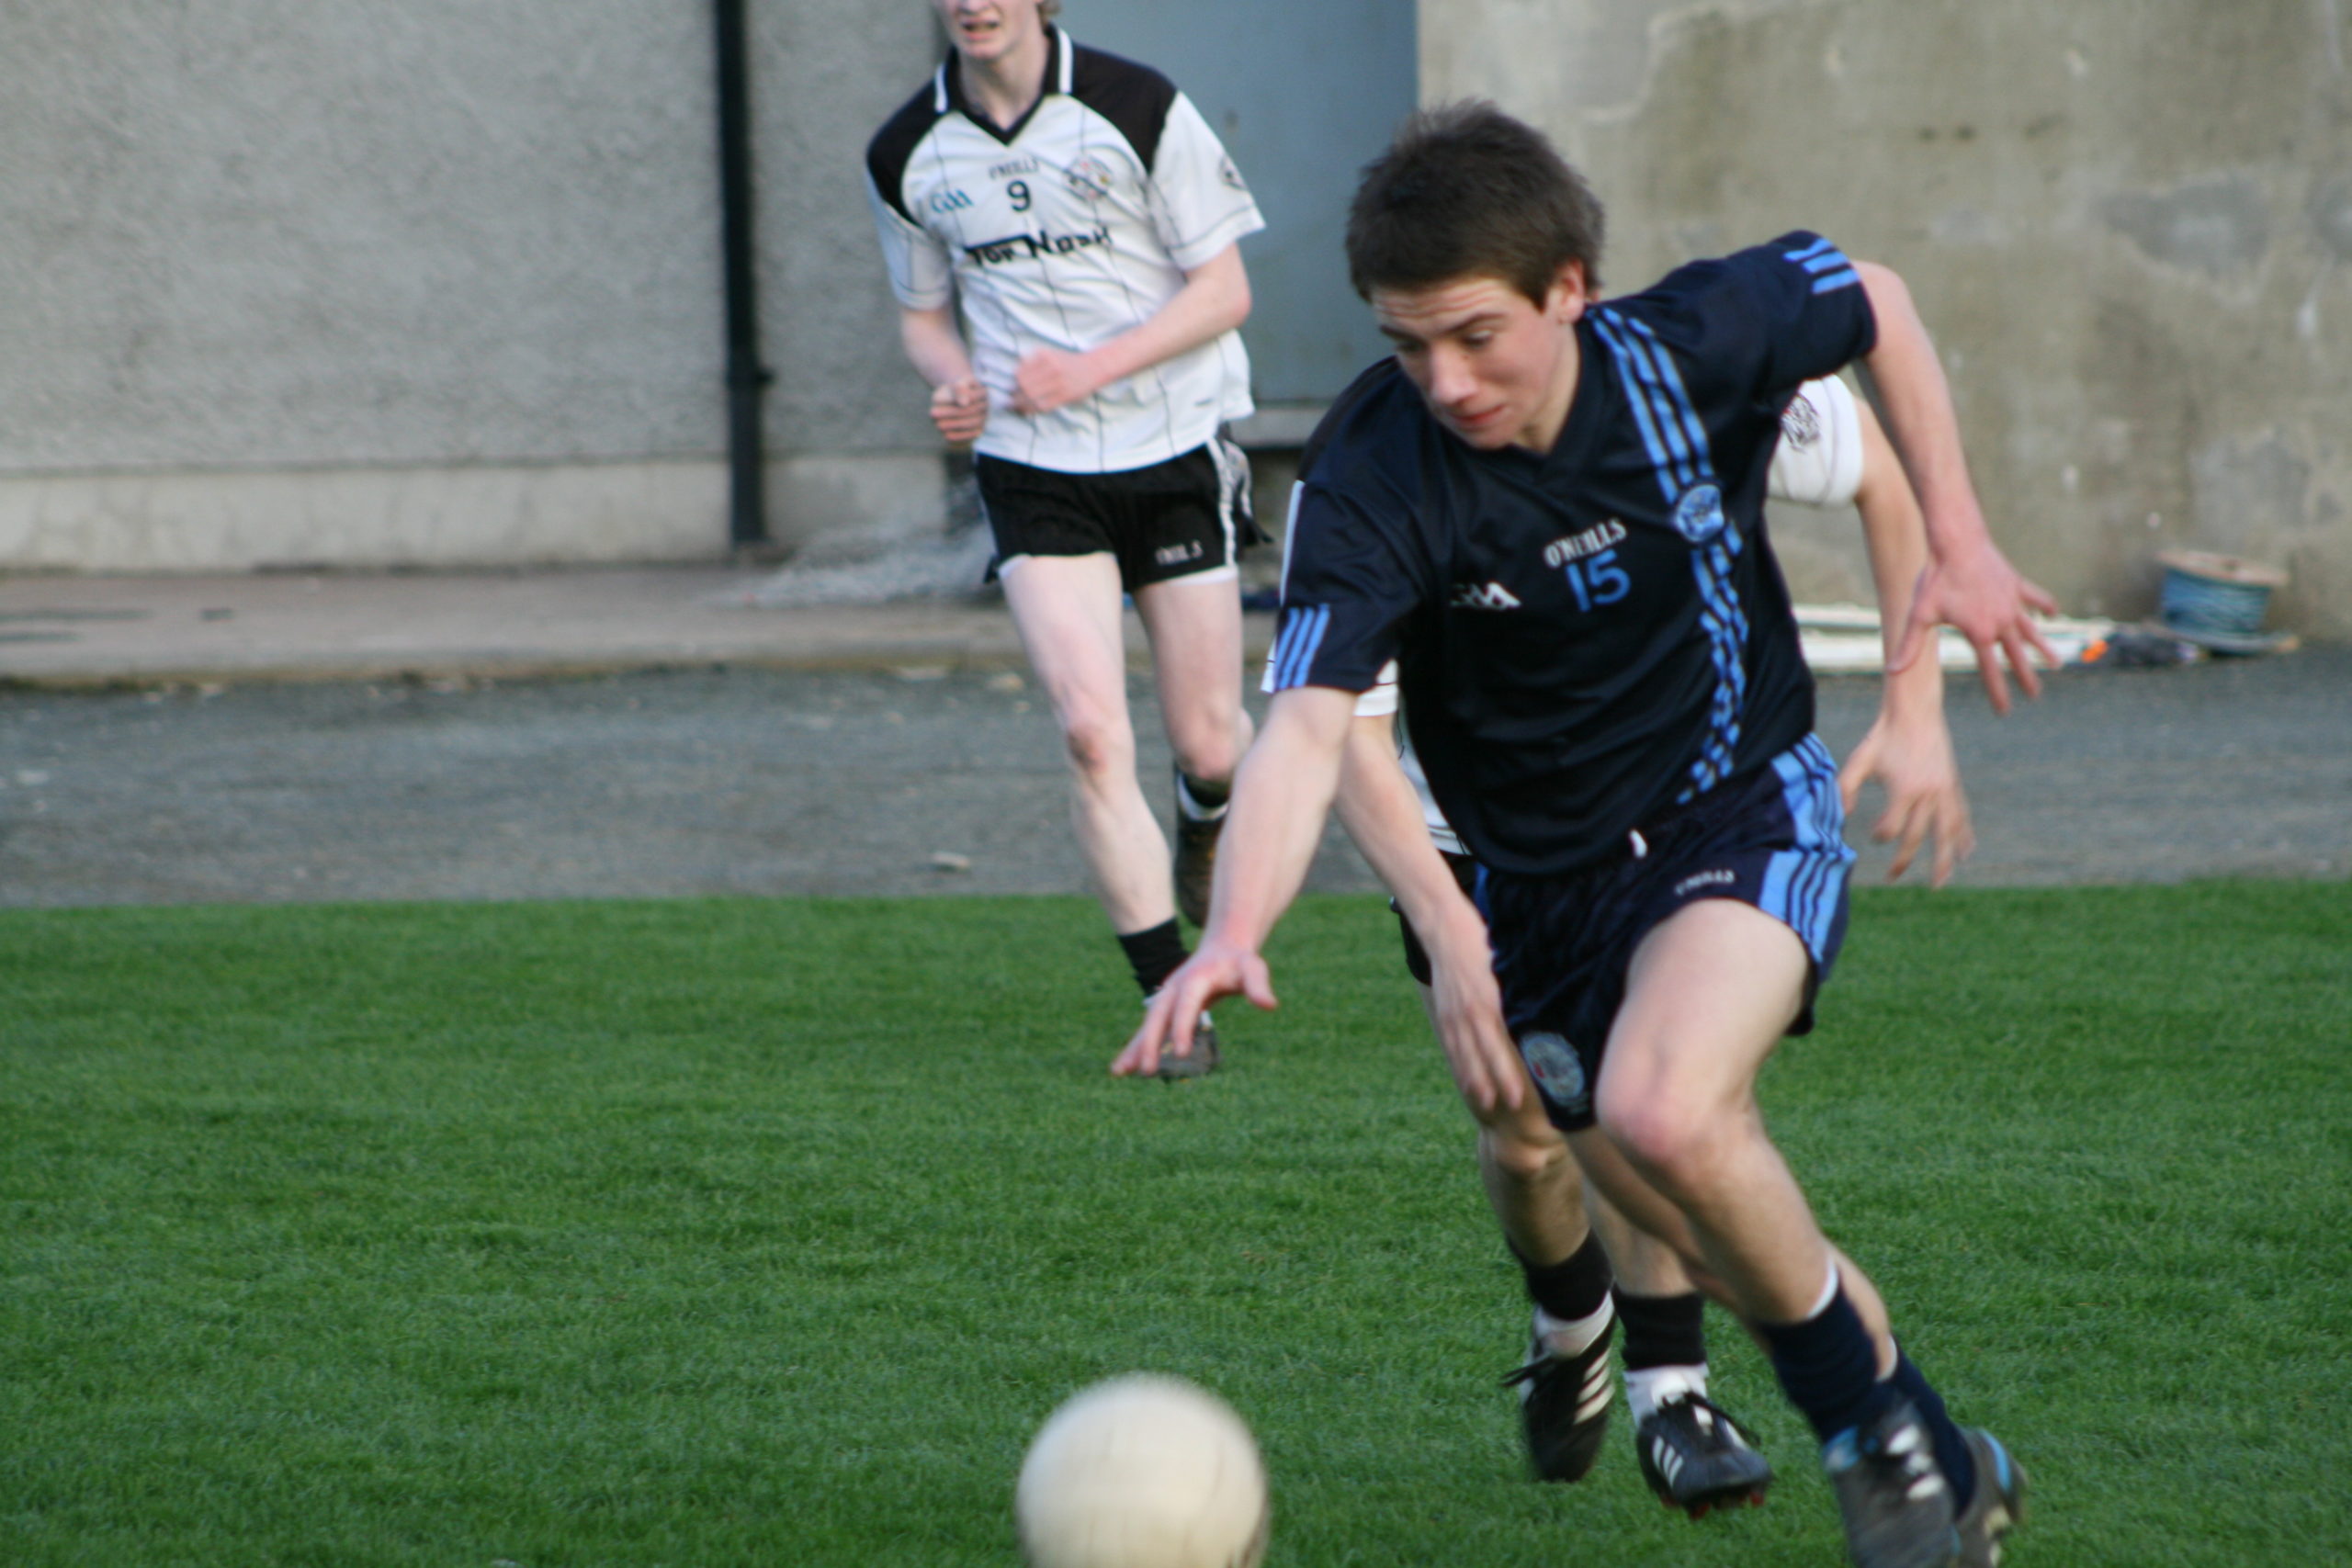 Minor Training continues Monday 26th March 7.30pm.